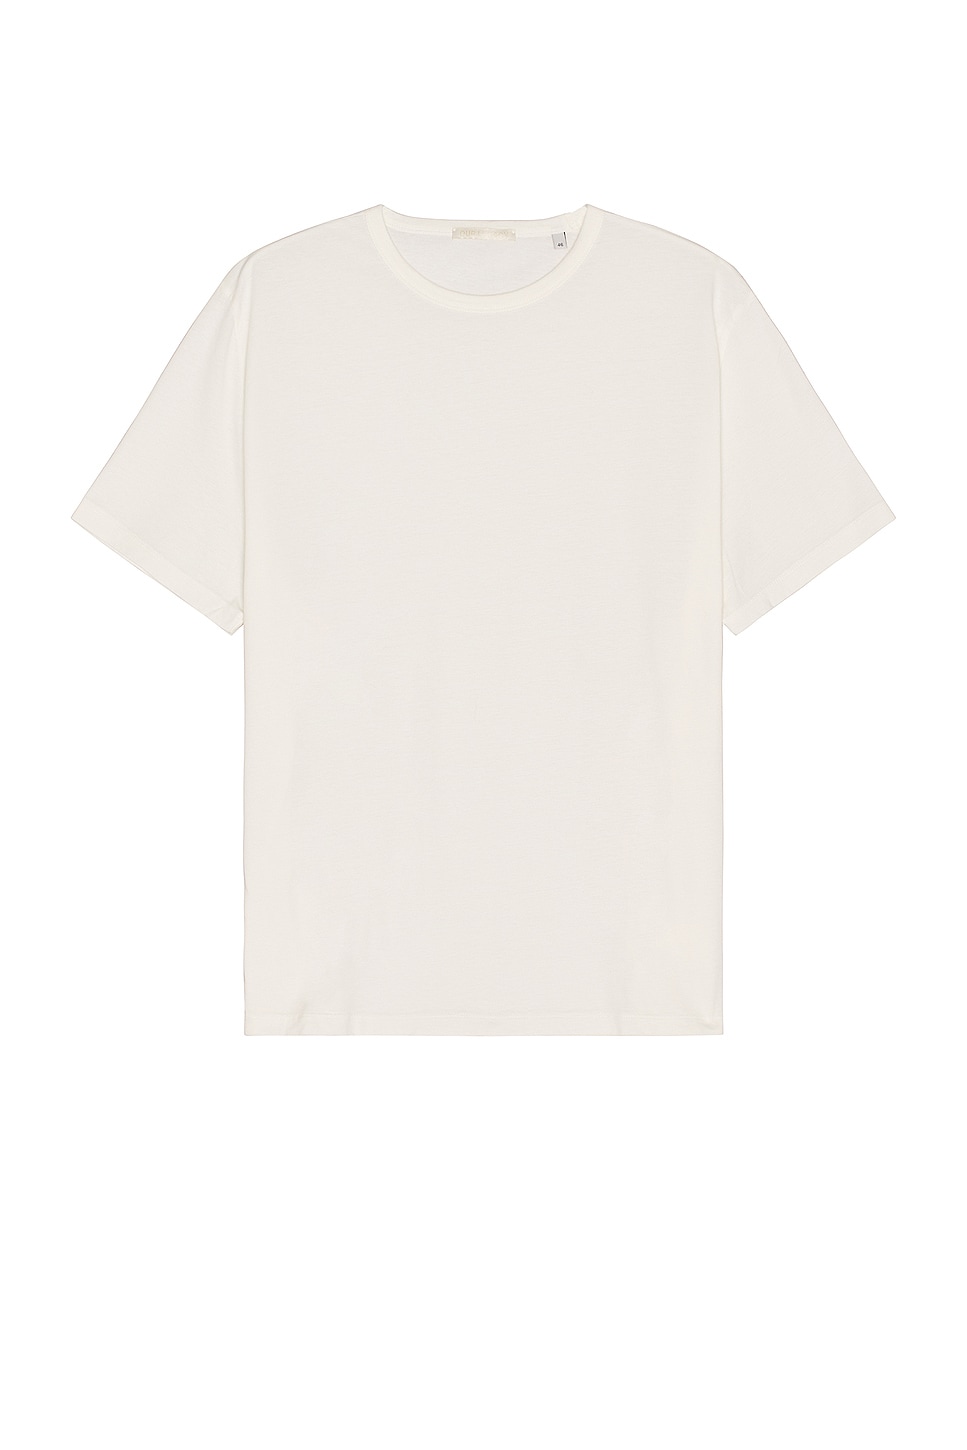 Image 1 of Our Legacy New Box T-Shirt in White Clean Jersey